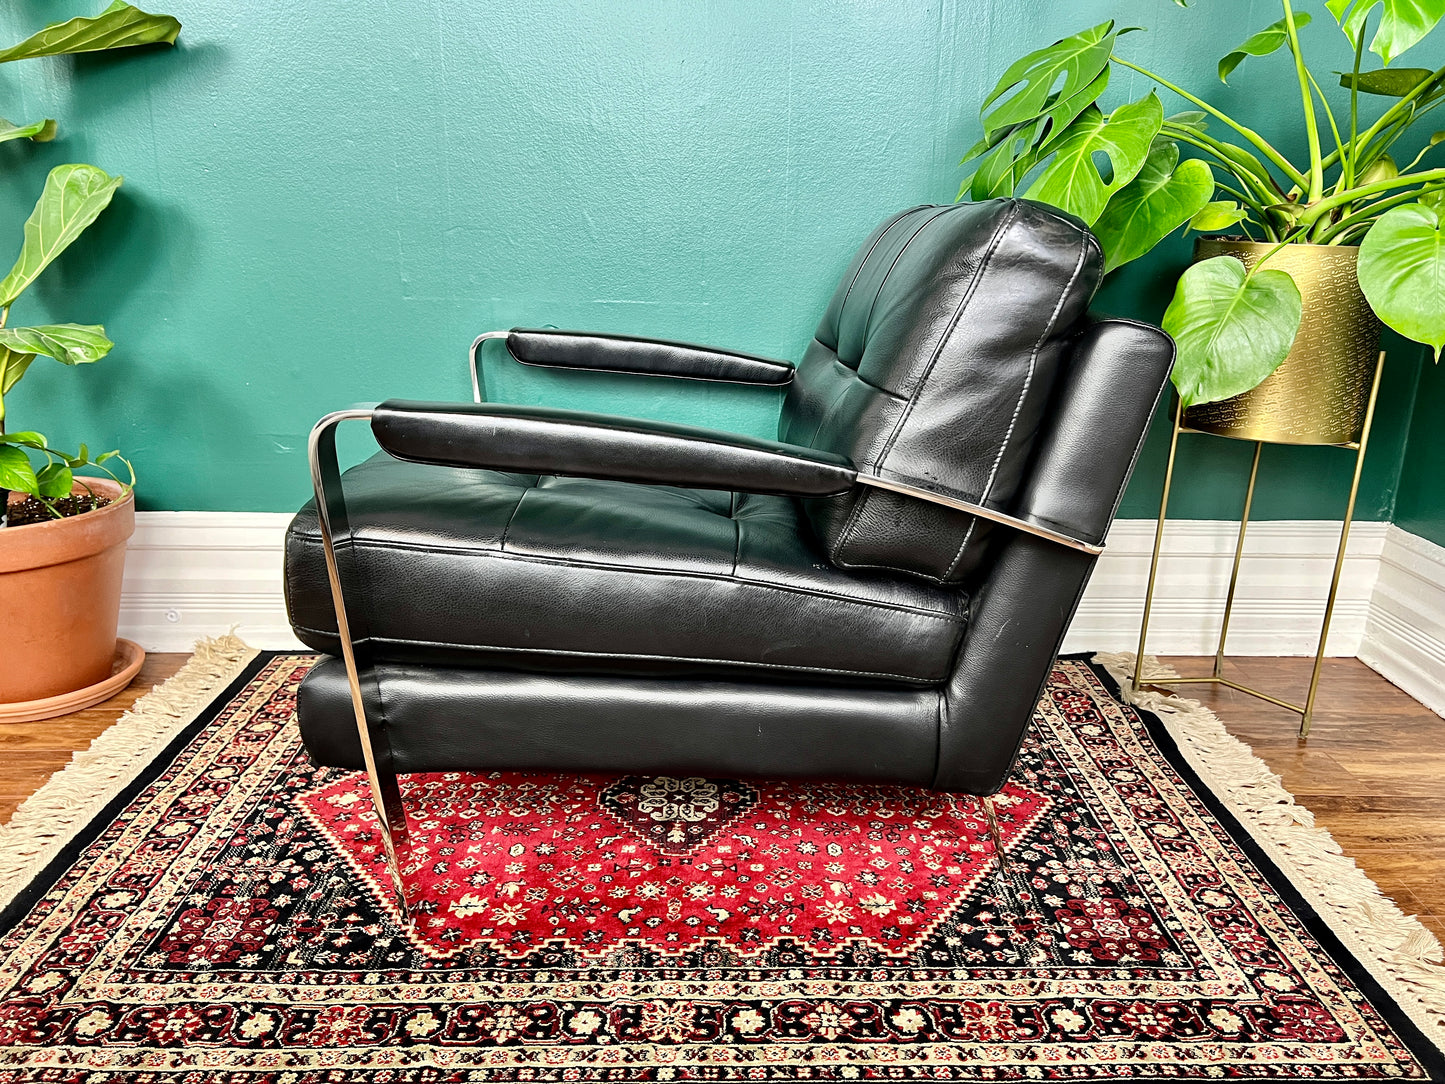 The Jet Stream Chair